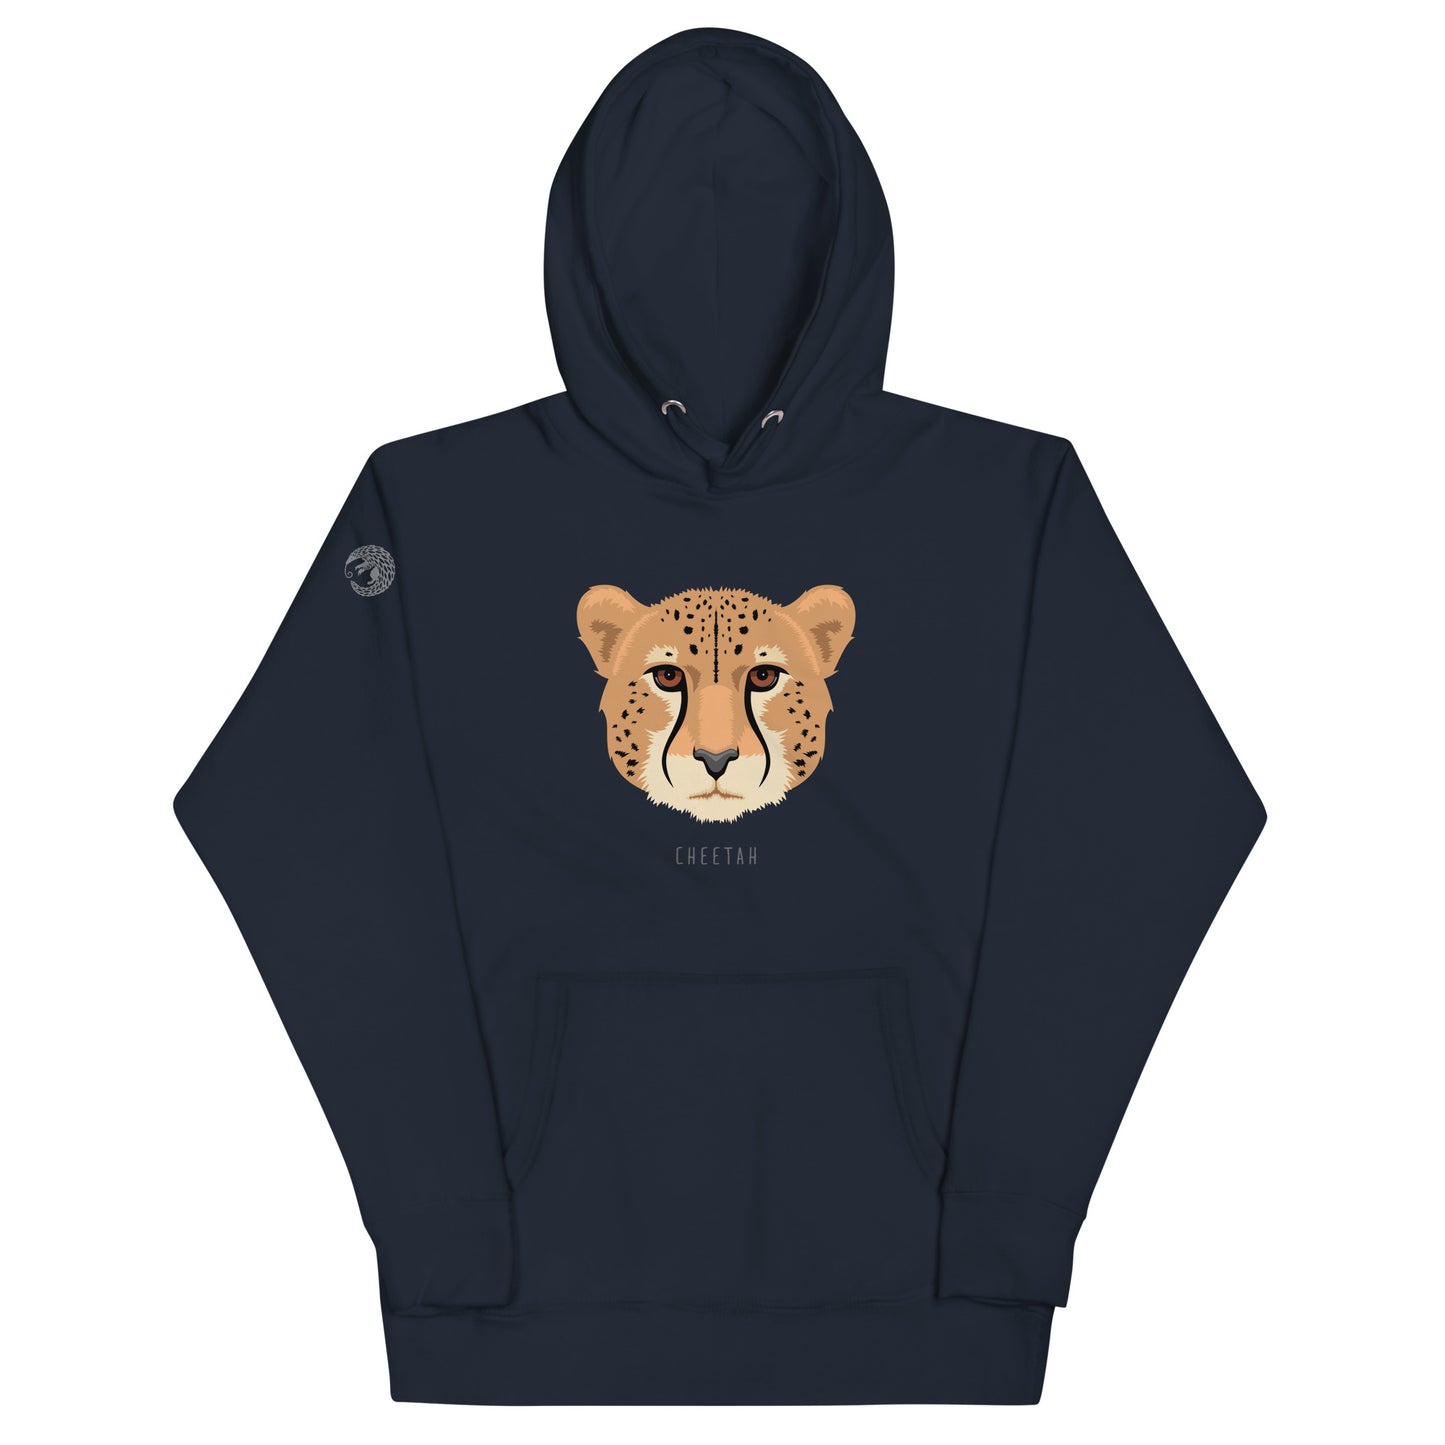 A navy blue, hooded, pullover sweatshirt with an illustration of a cheetah's face and thew world "cheetah" beneath it. 